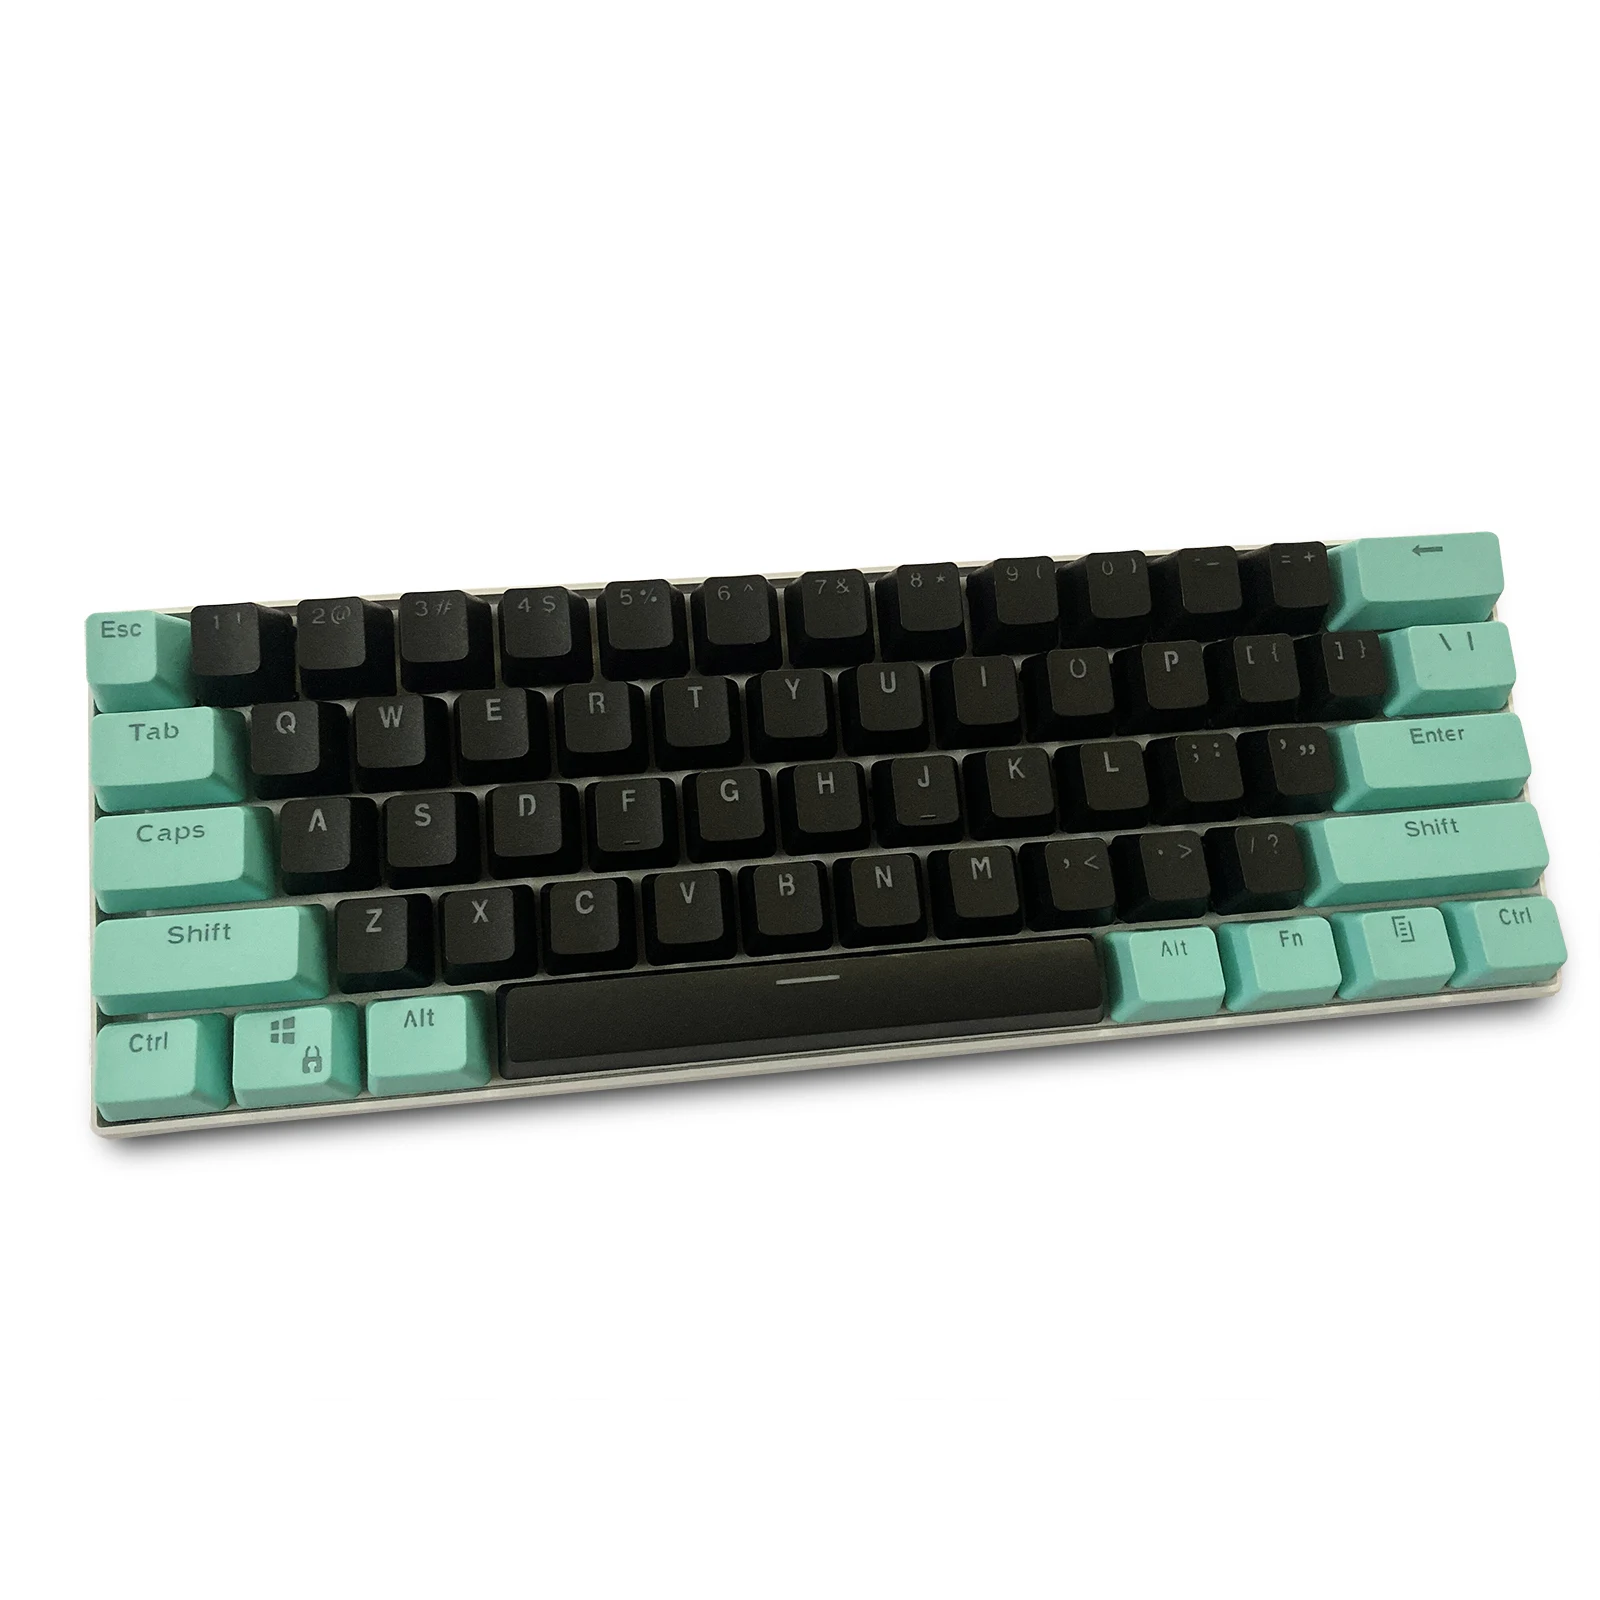 https://ae01.alicdn.com/kf/Acbc656710fb6419f9bc8e0fdfa9663b46/RK-61-Keycaps-PBT-Material-OEM-Highly-Keycaps-Backlit-Two-Color-Mechanical-Keyboard-Keycaps-Keycaps-Only.jpg